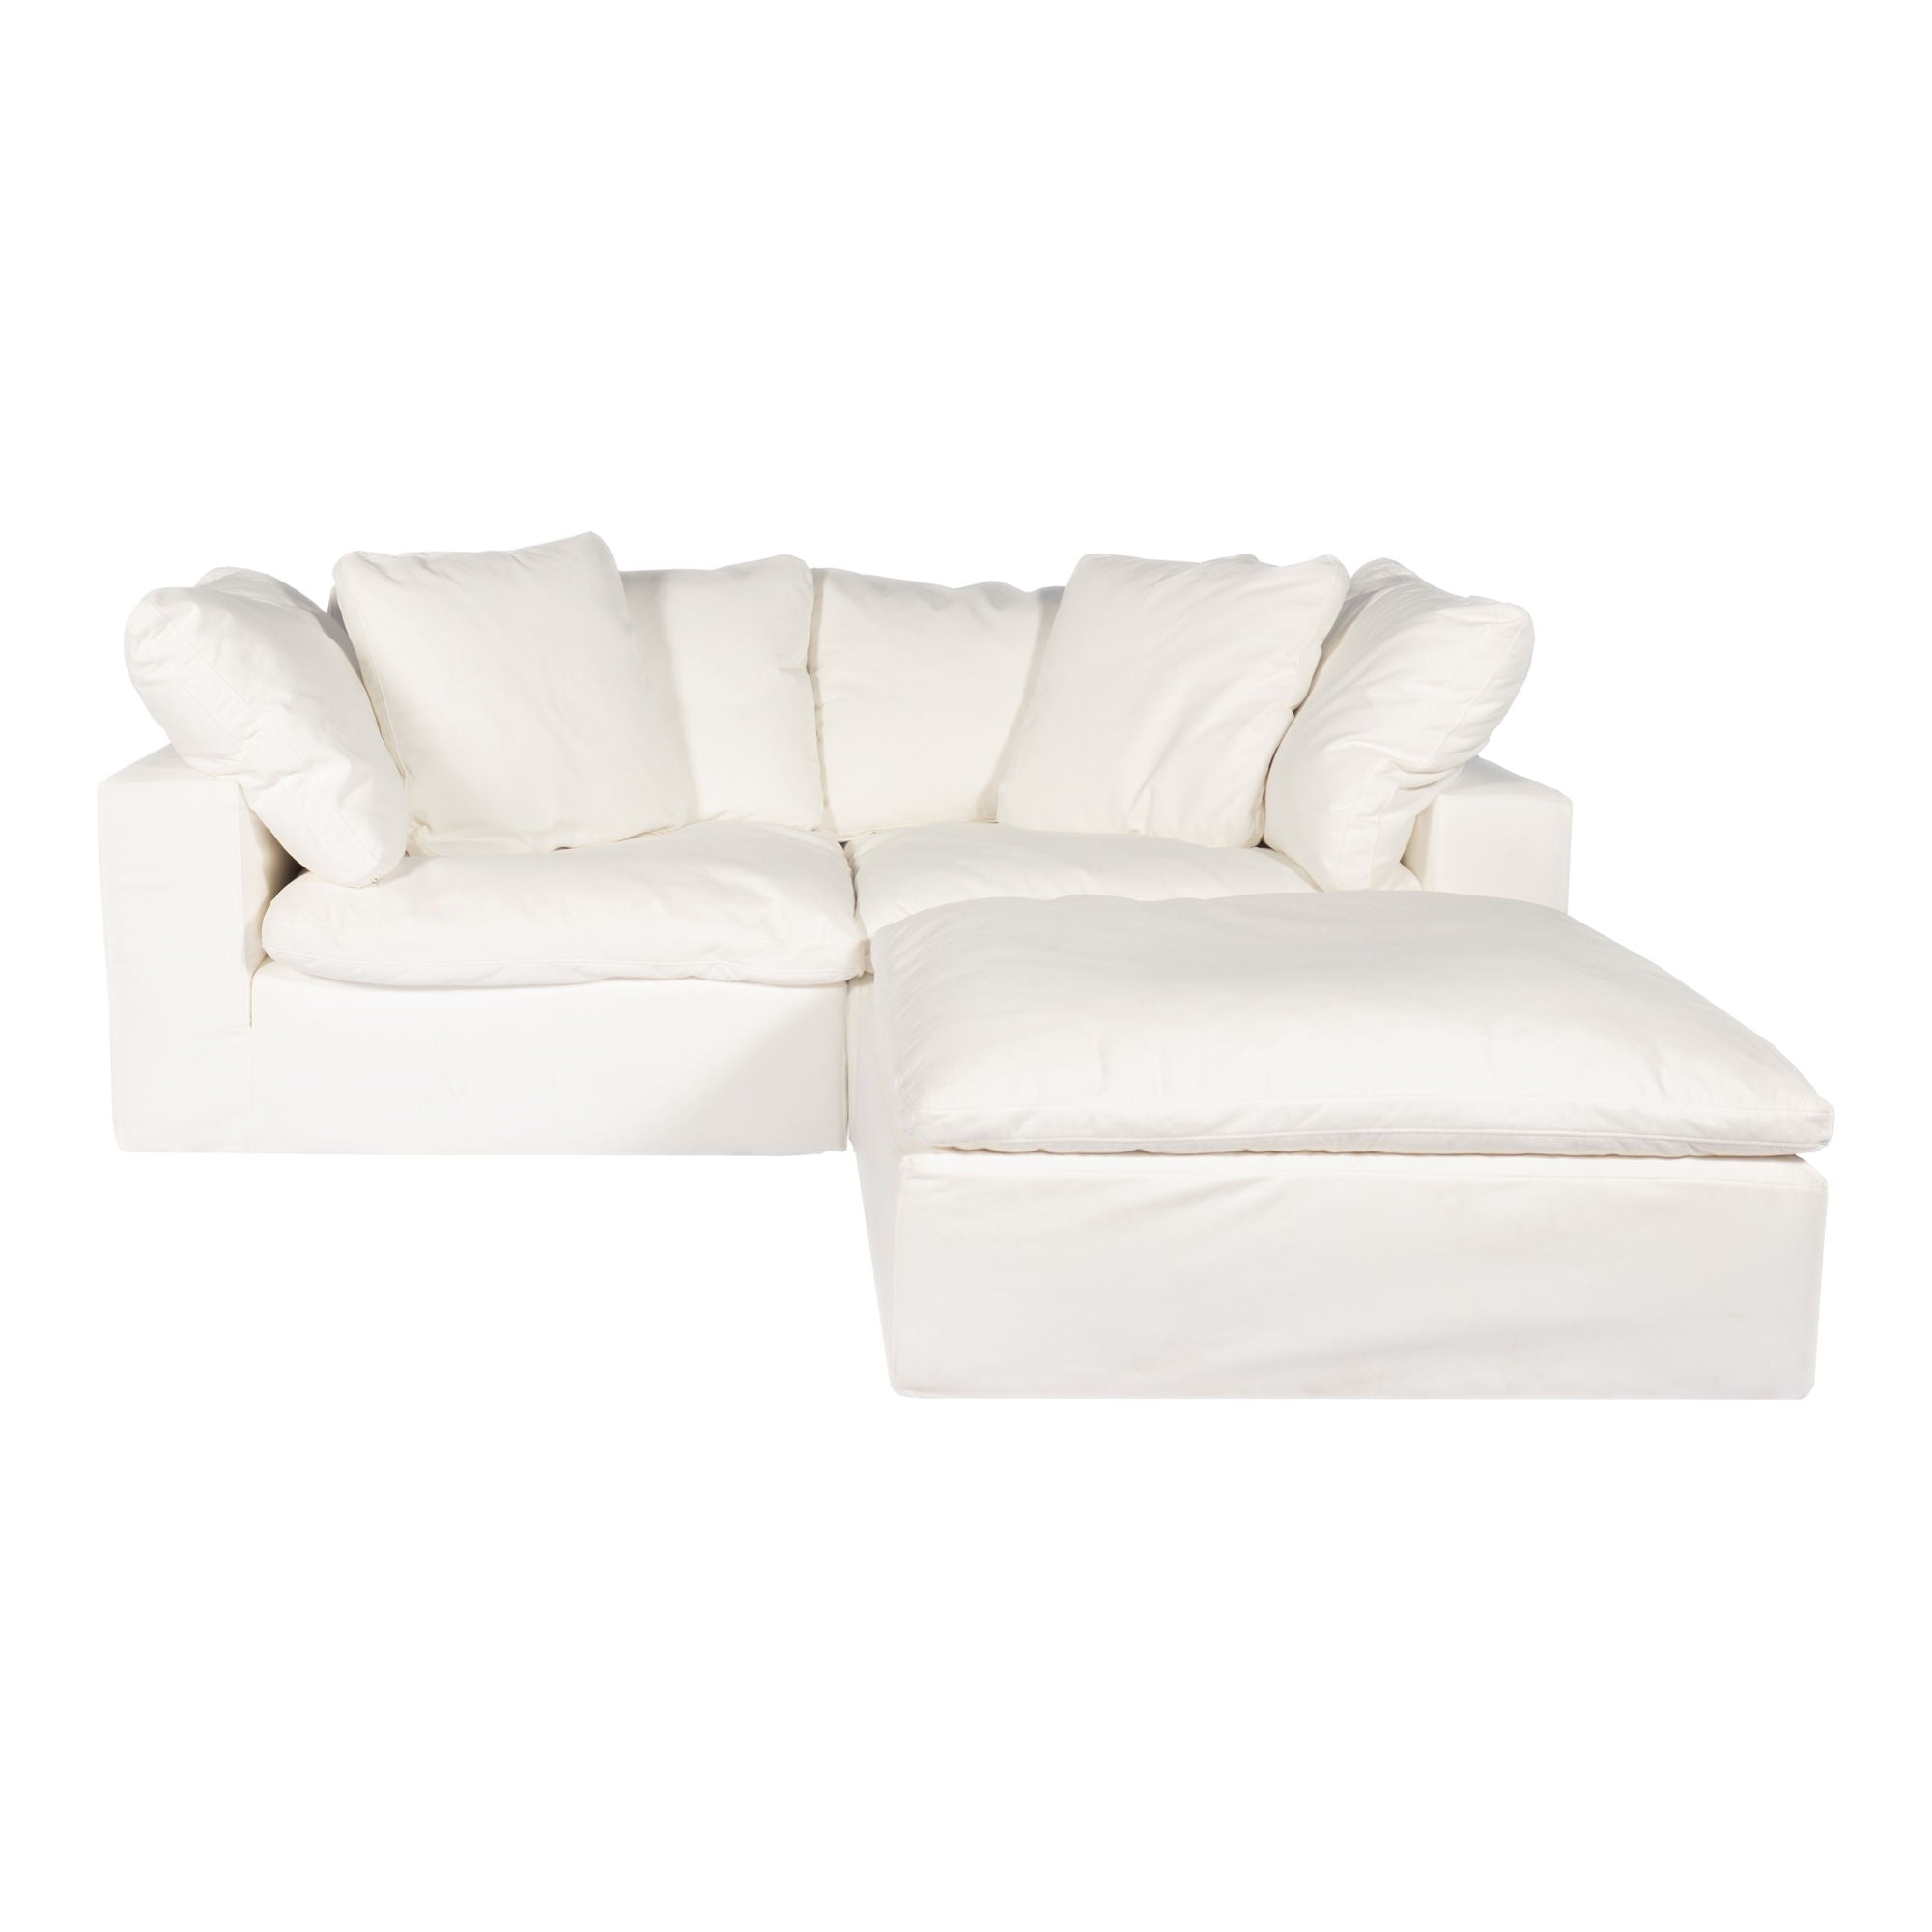 Clay - Nook Modular Sectional Livesmart Fabric - Cream-Stationary Sectionals-American Furniture Outlet